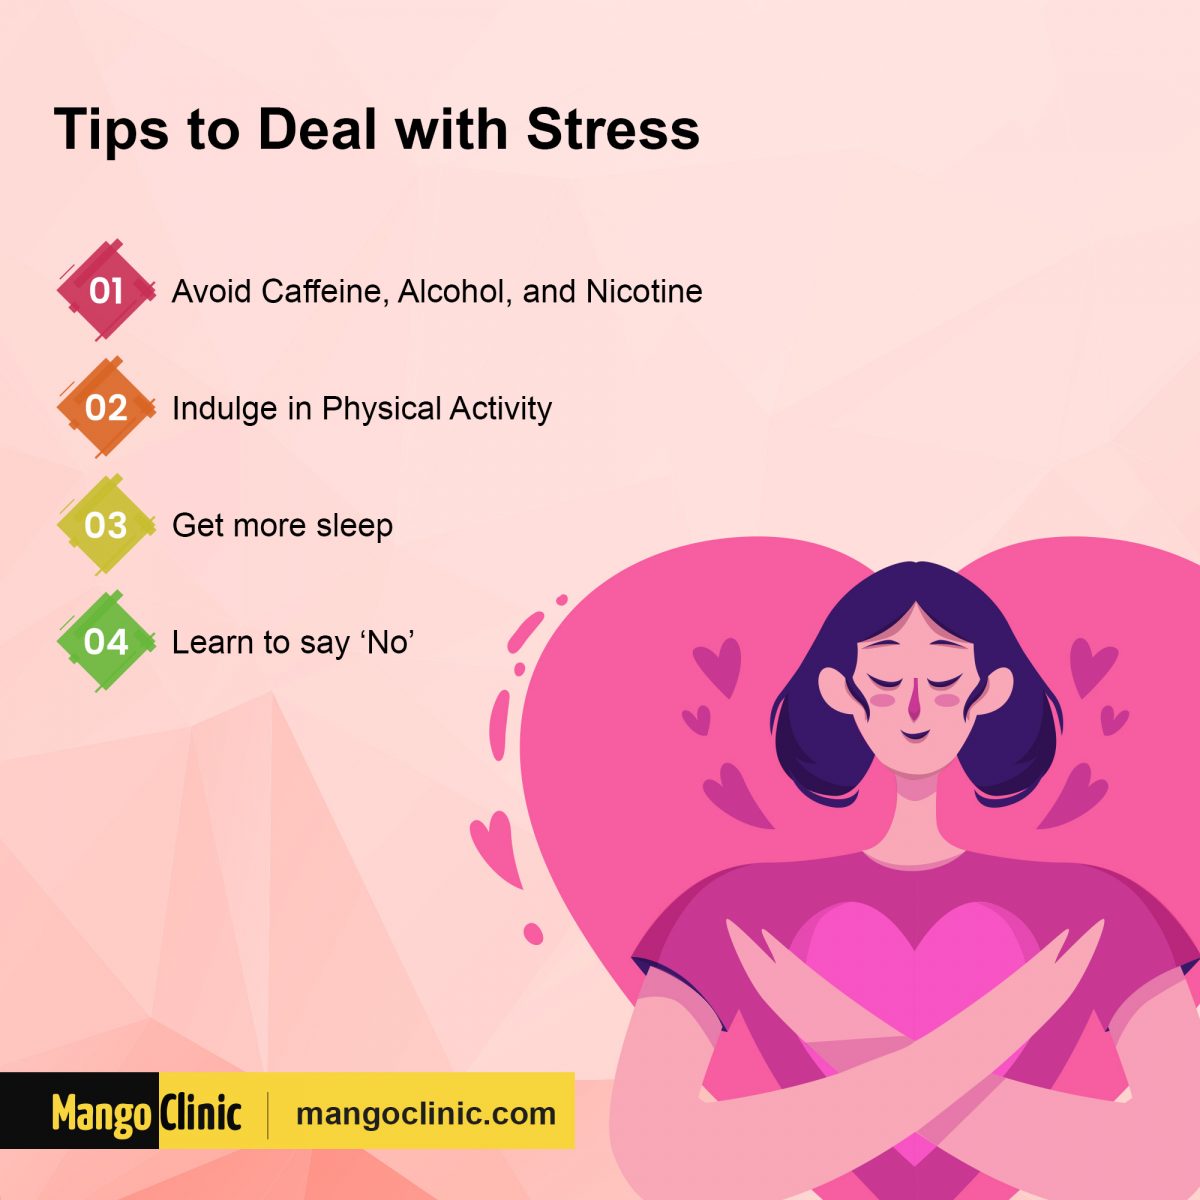 Deal with Stress